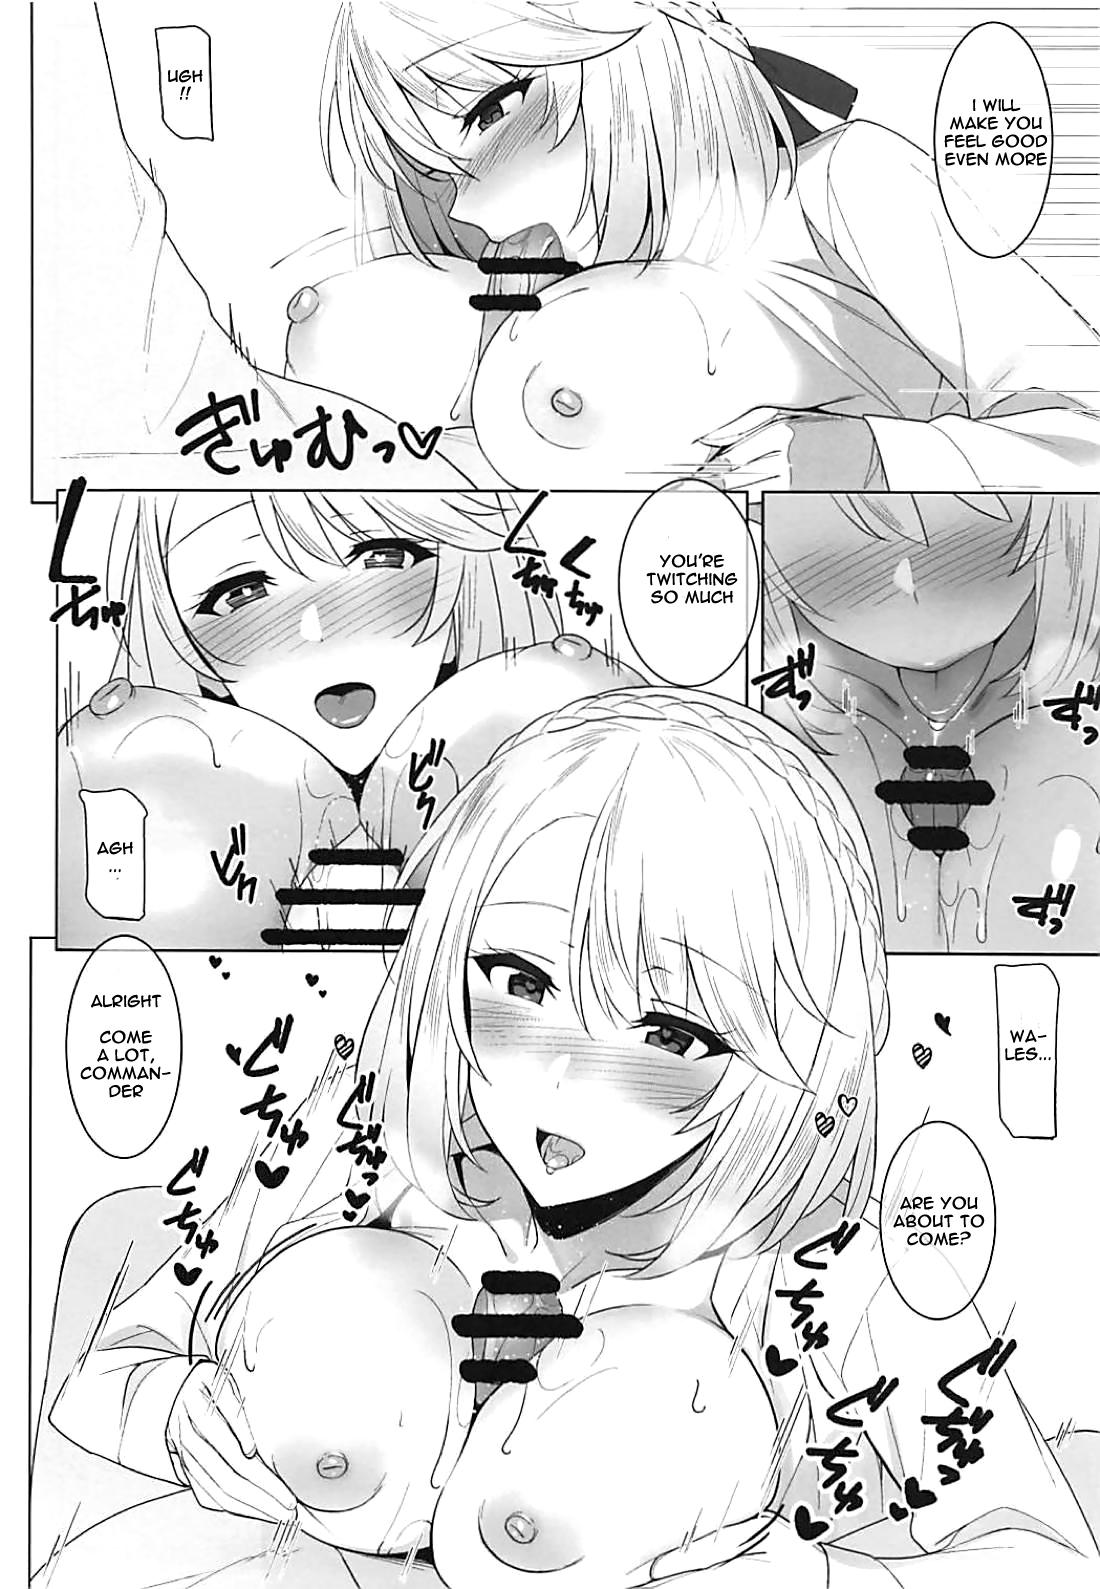 Exgf Wales to! | With Wales! - Azur lane Free Blow Job Porn - Page 10